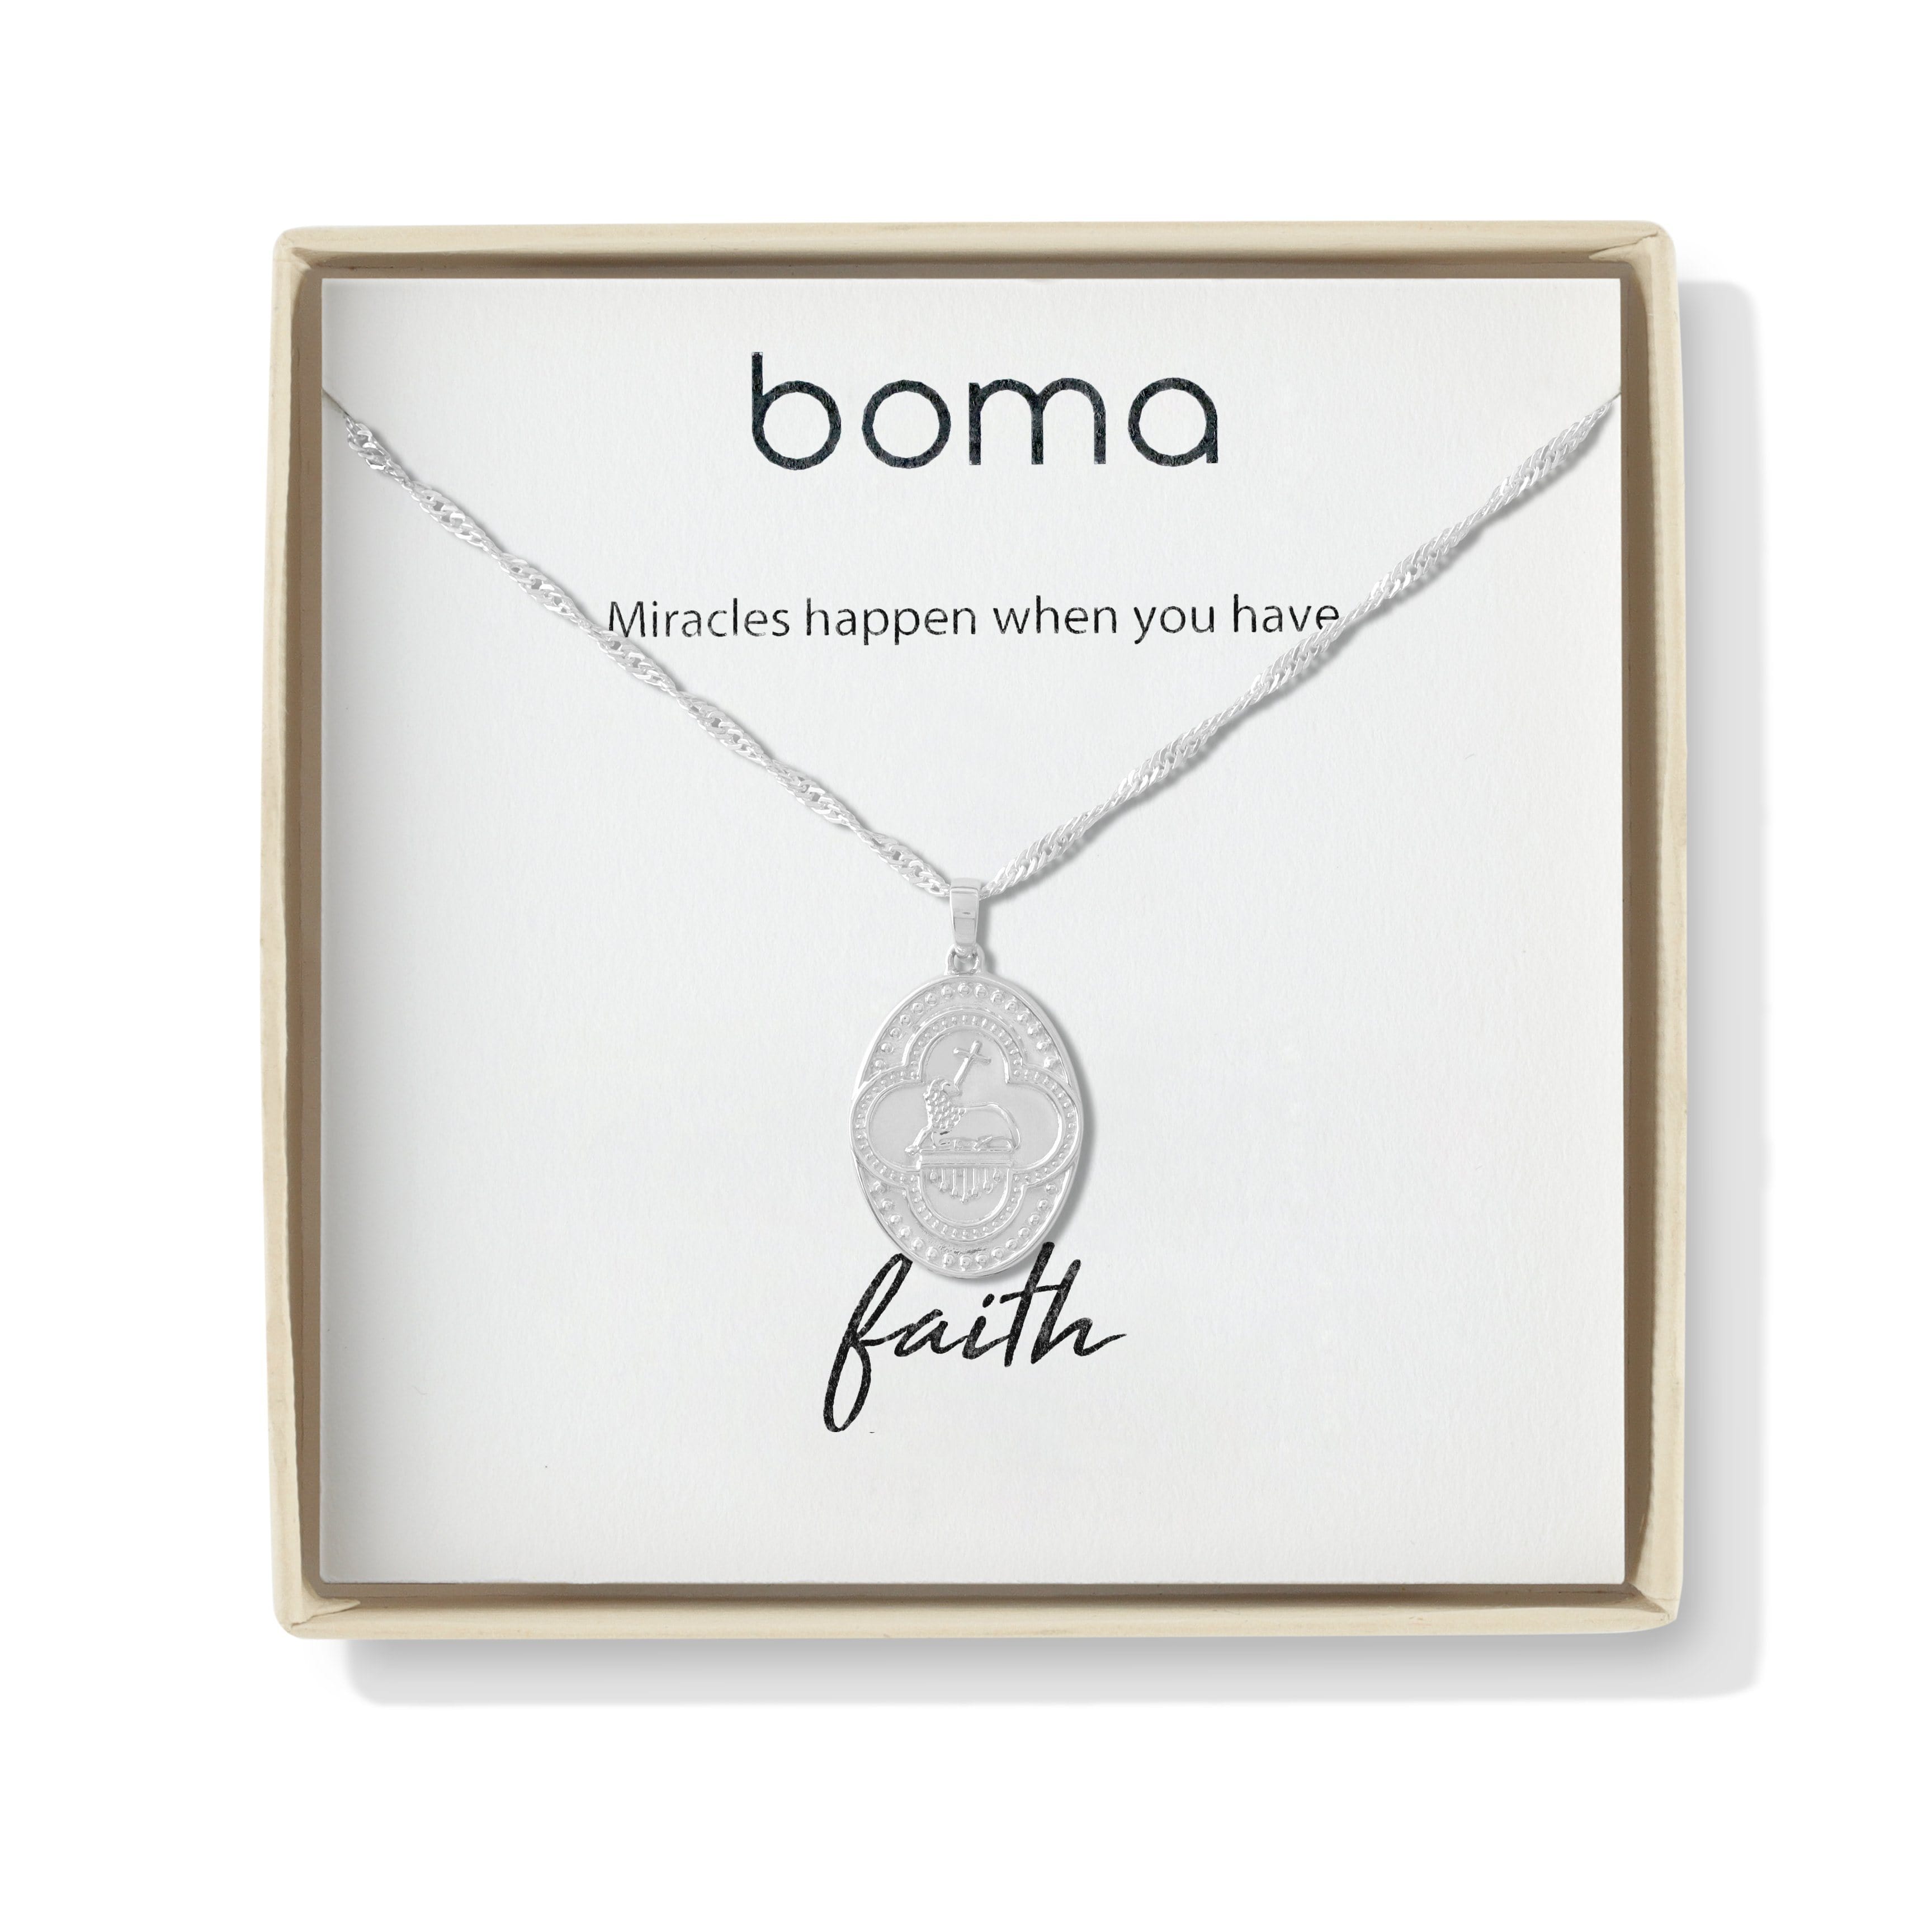 Boma Jewelry Necklaces Two way Sterling Silver Medallion Necklace